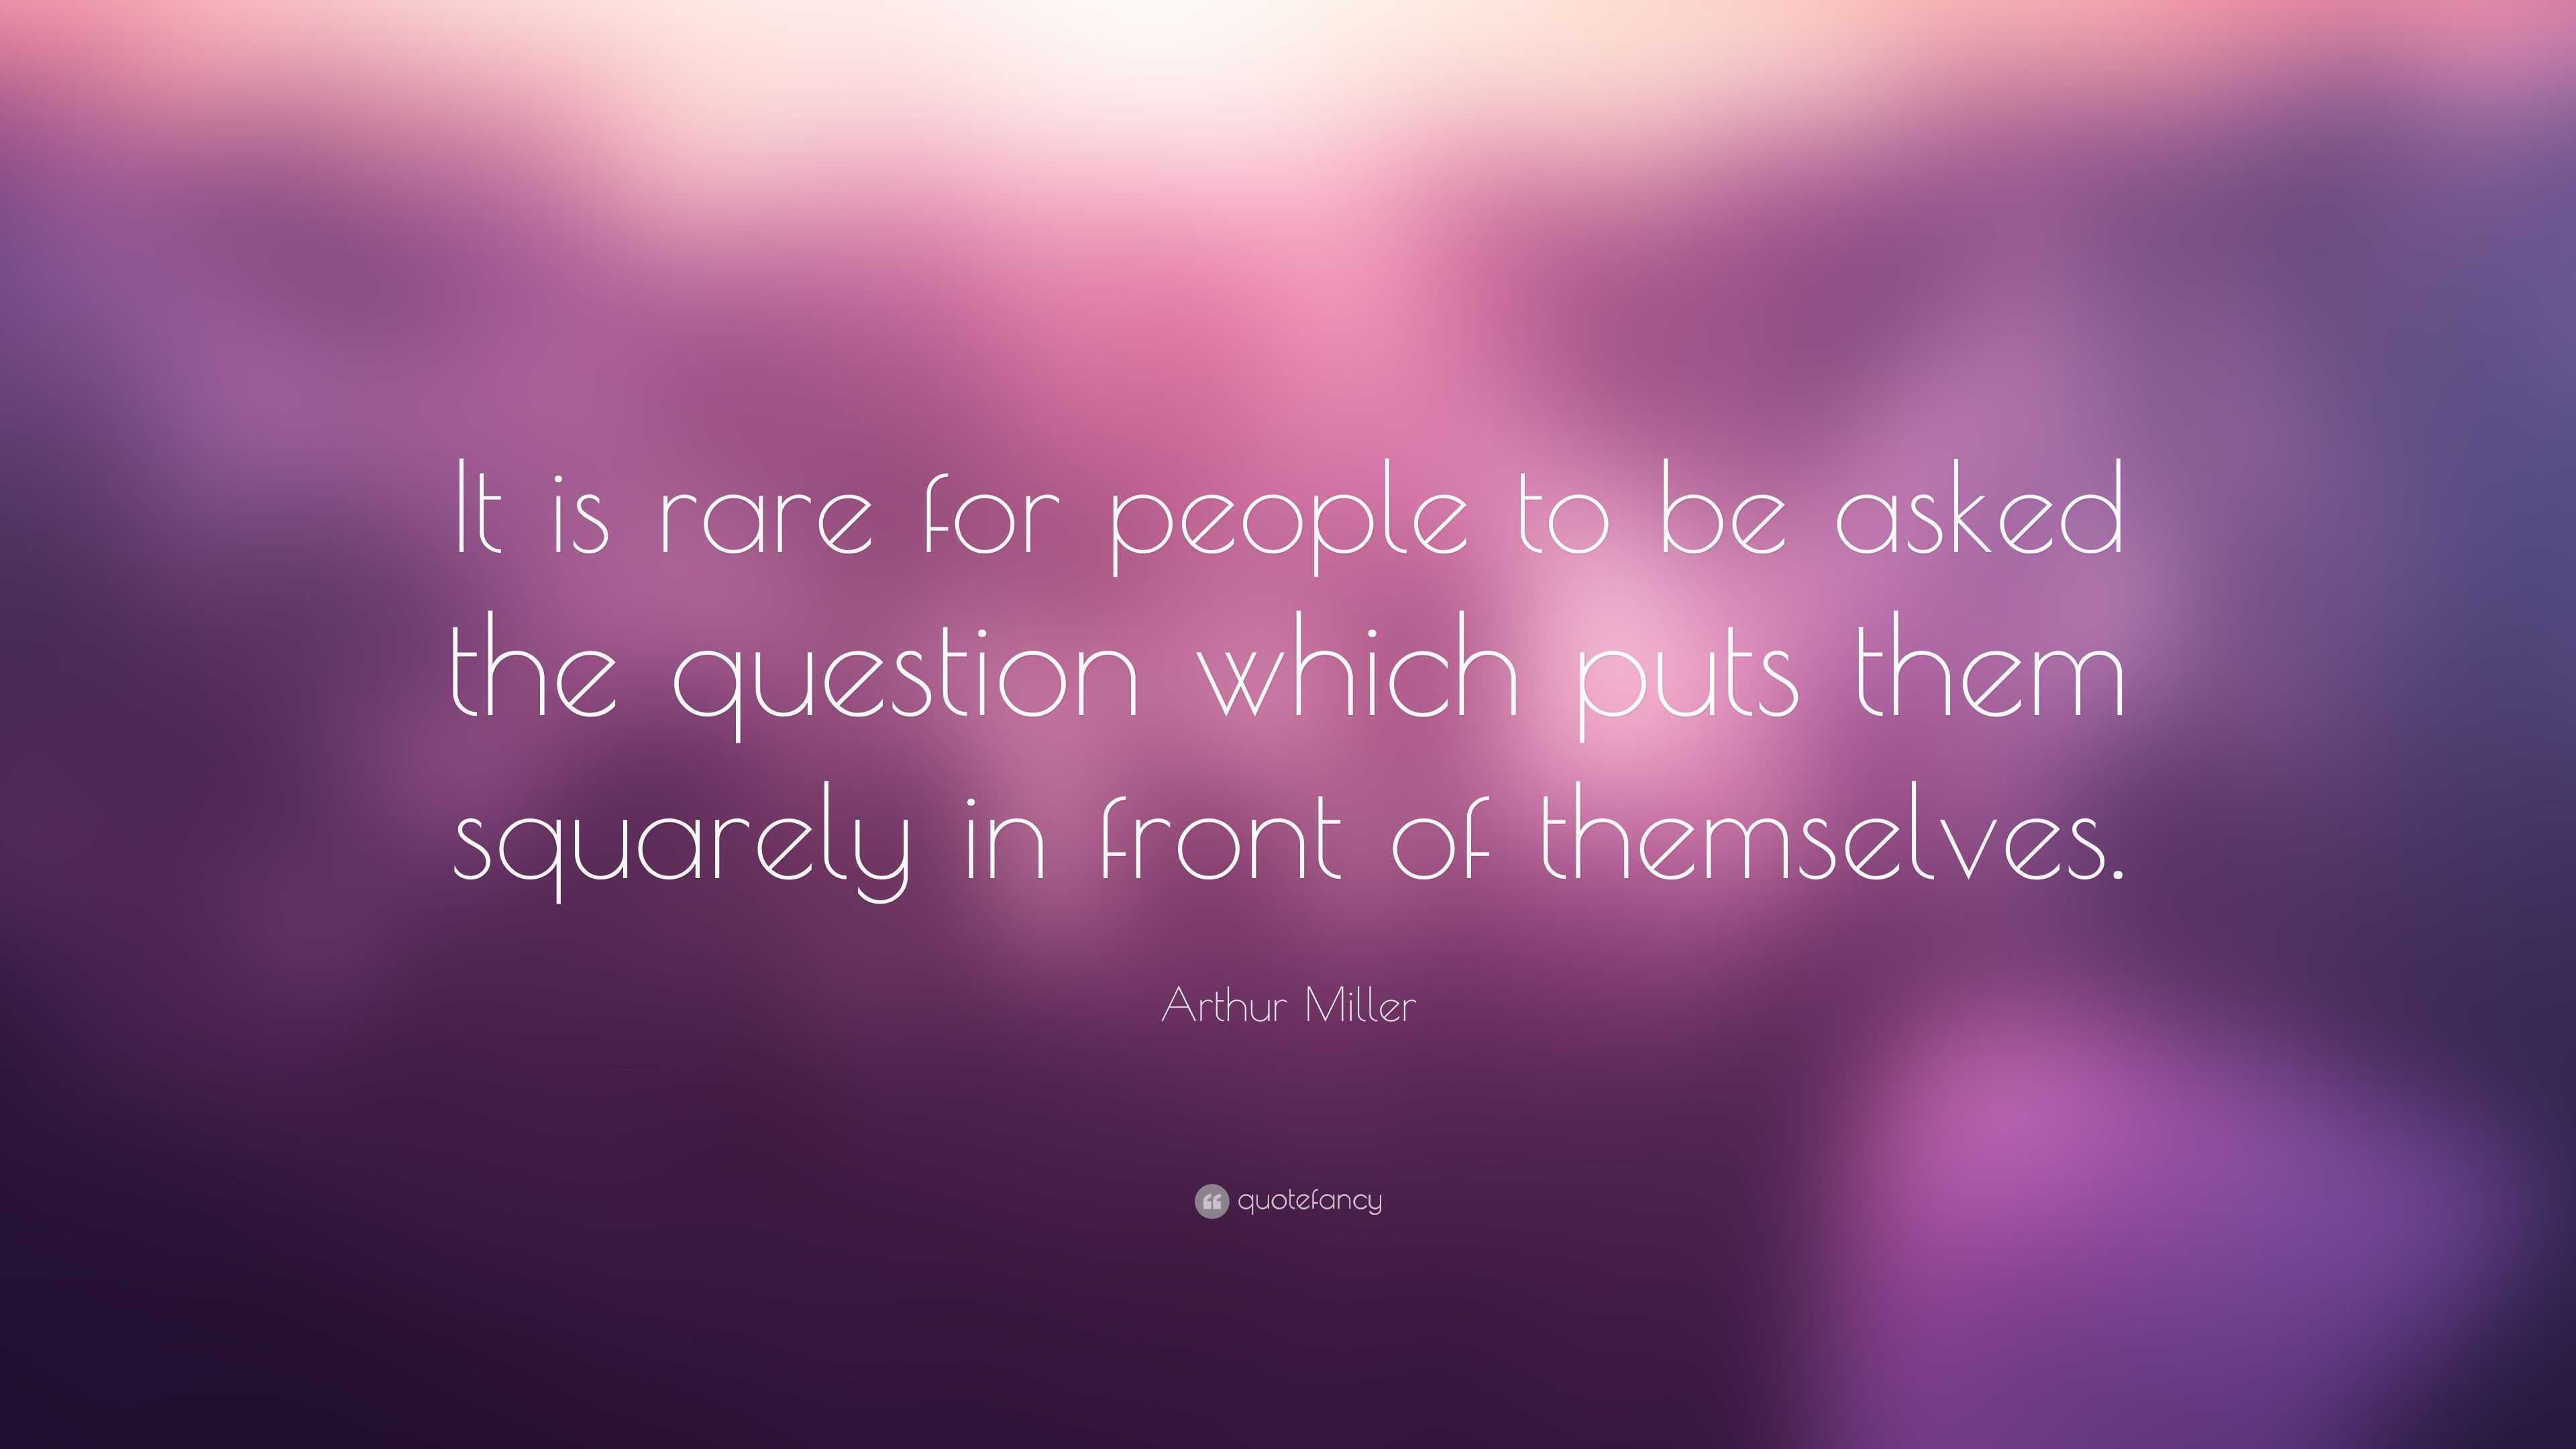 Arthur Miller Quote: “It is rare for people to be asked the question ...